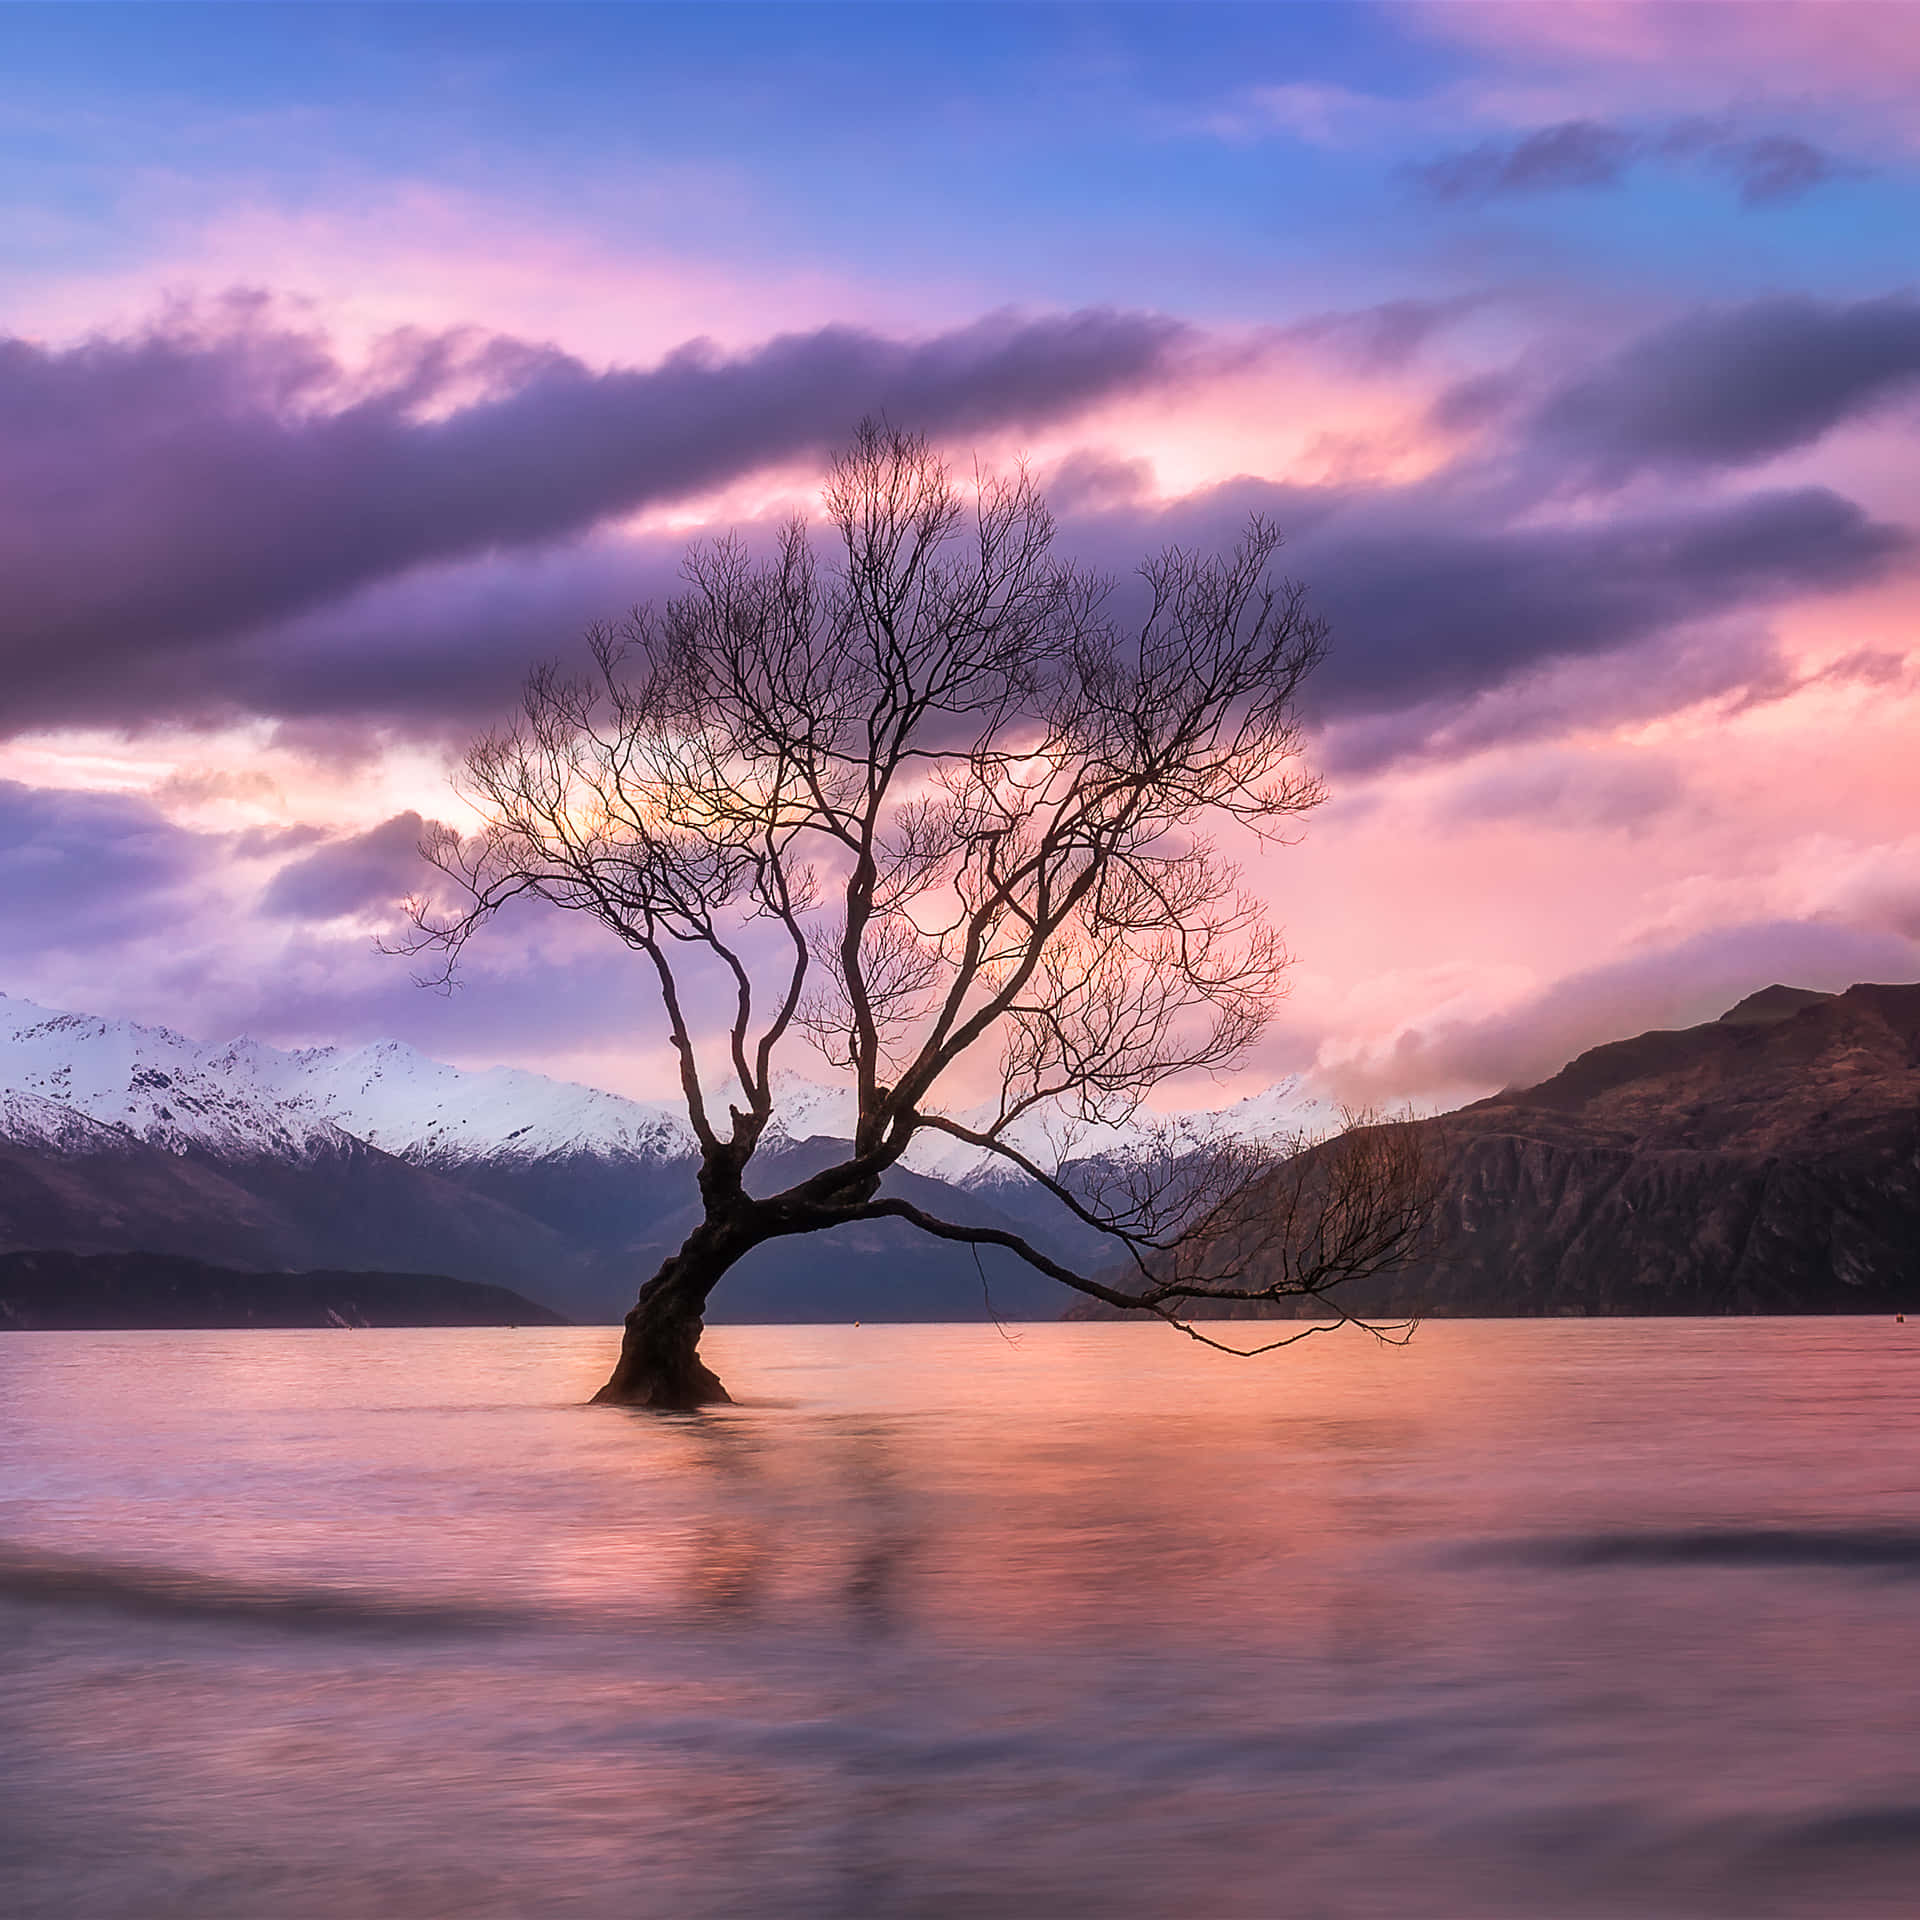 "A stunning view of New Zealand’s green - and sometimes snow-capped - hills.”